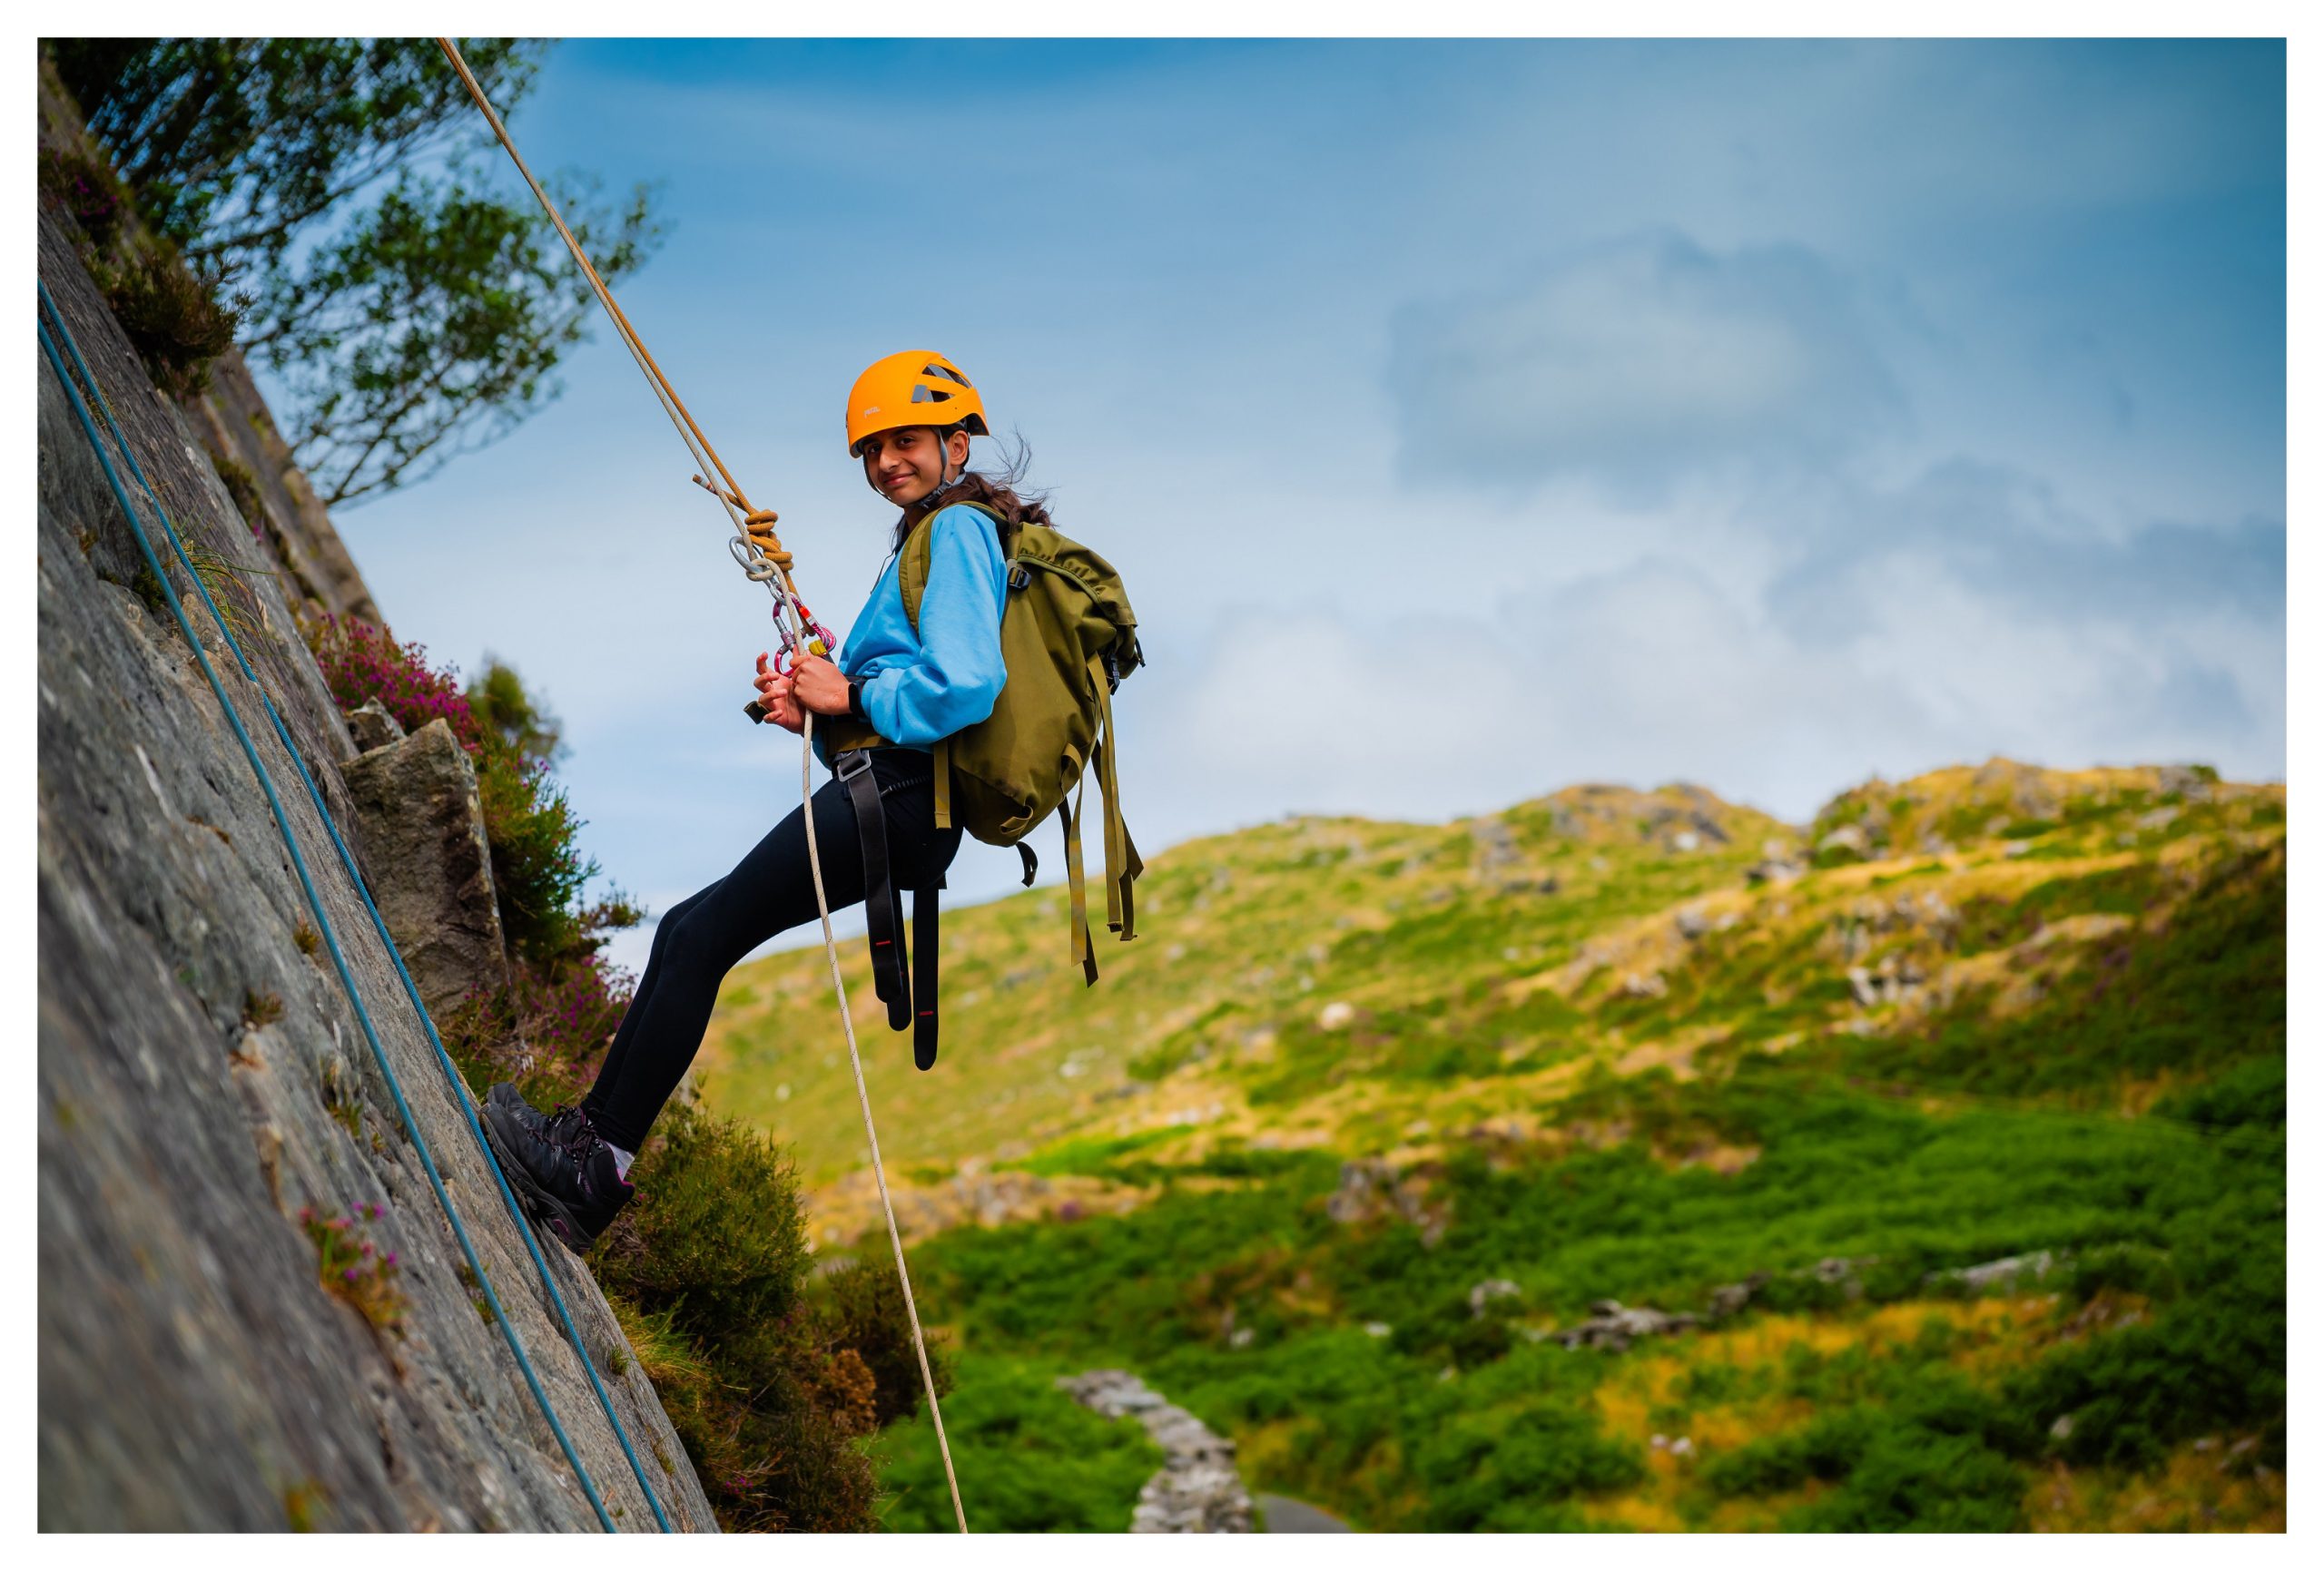 A girl abseiling on an outdoor trip